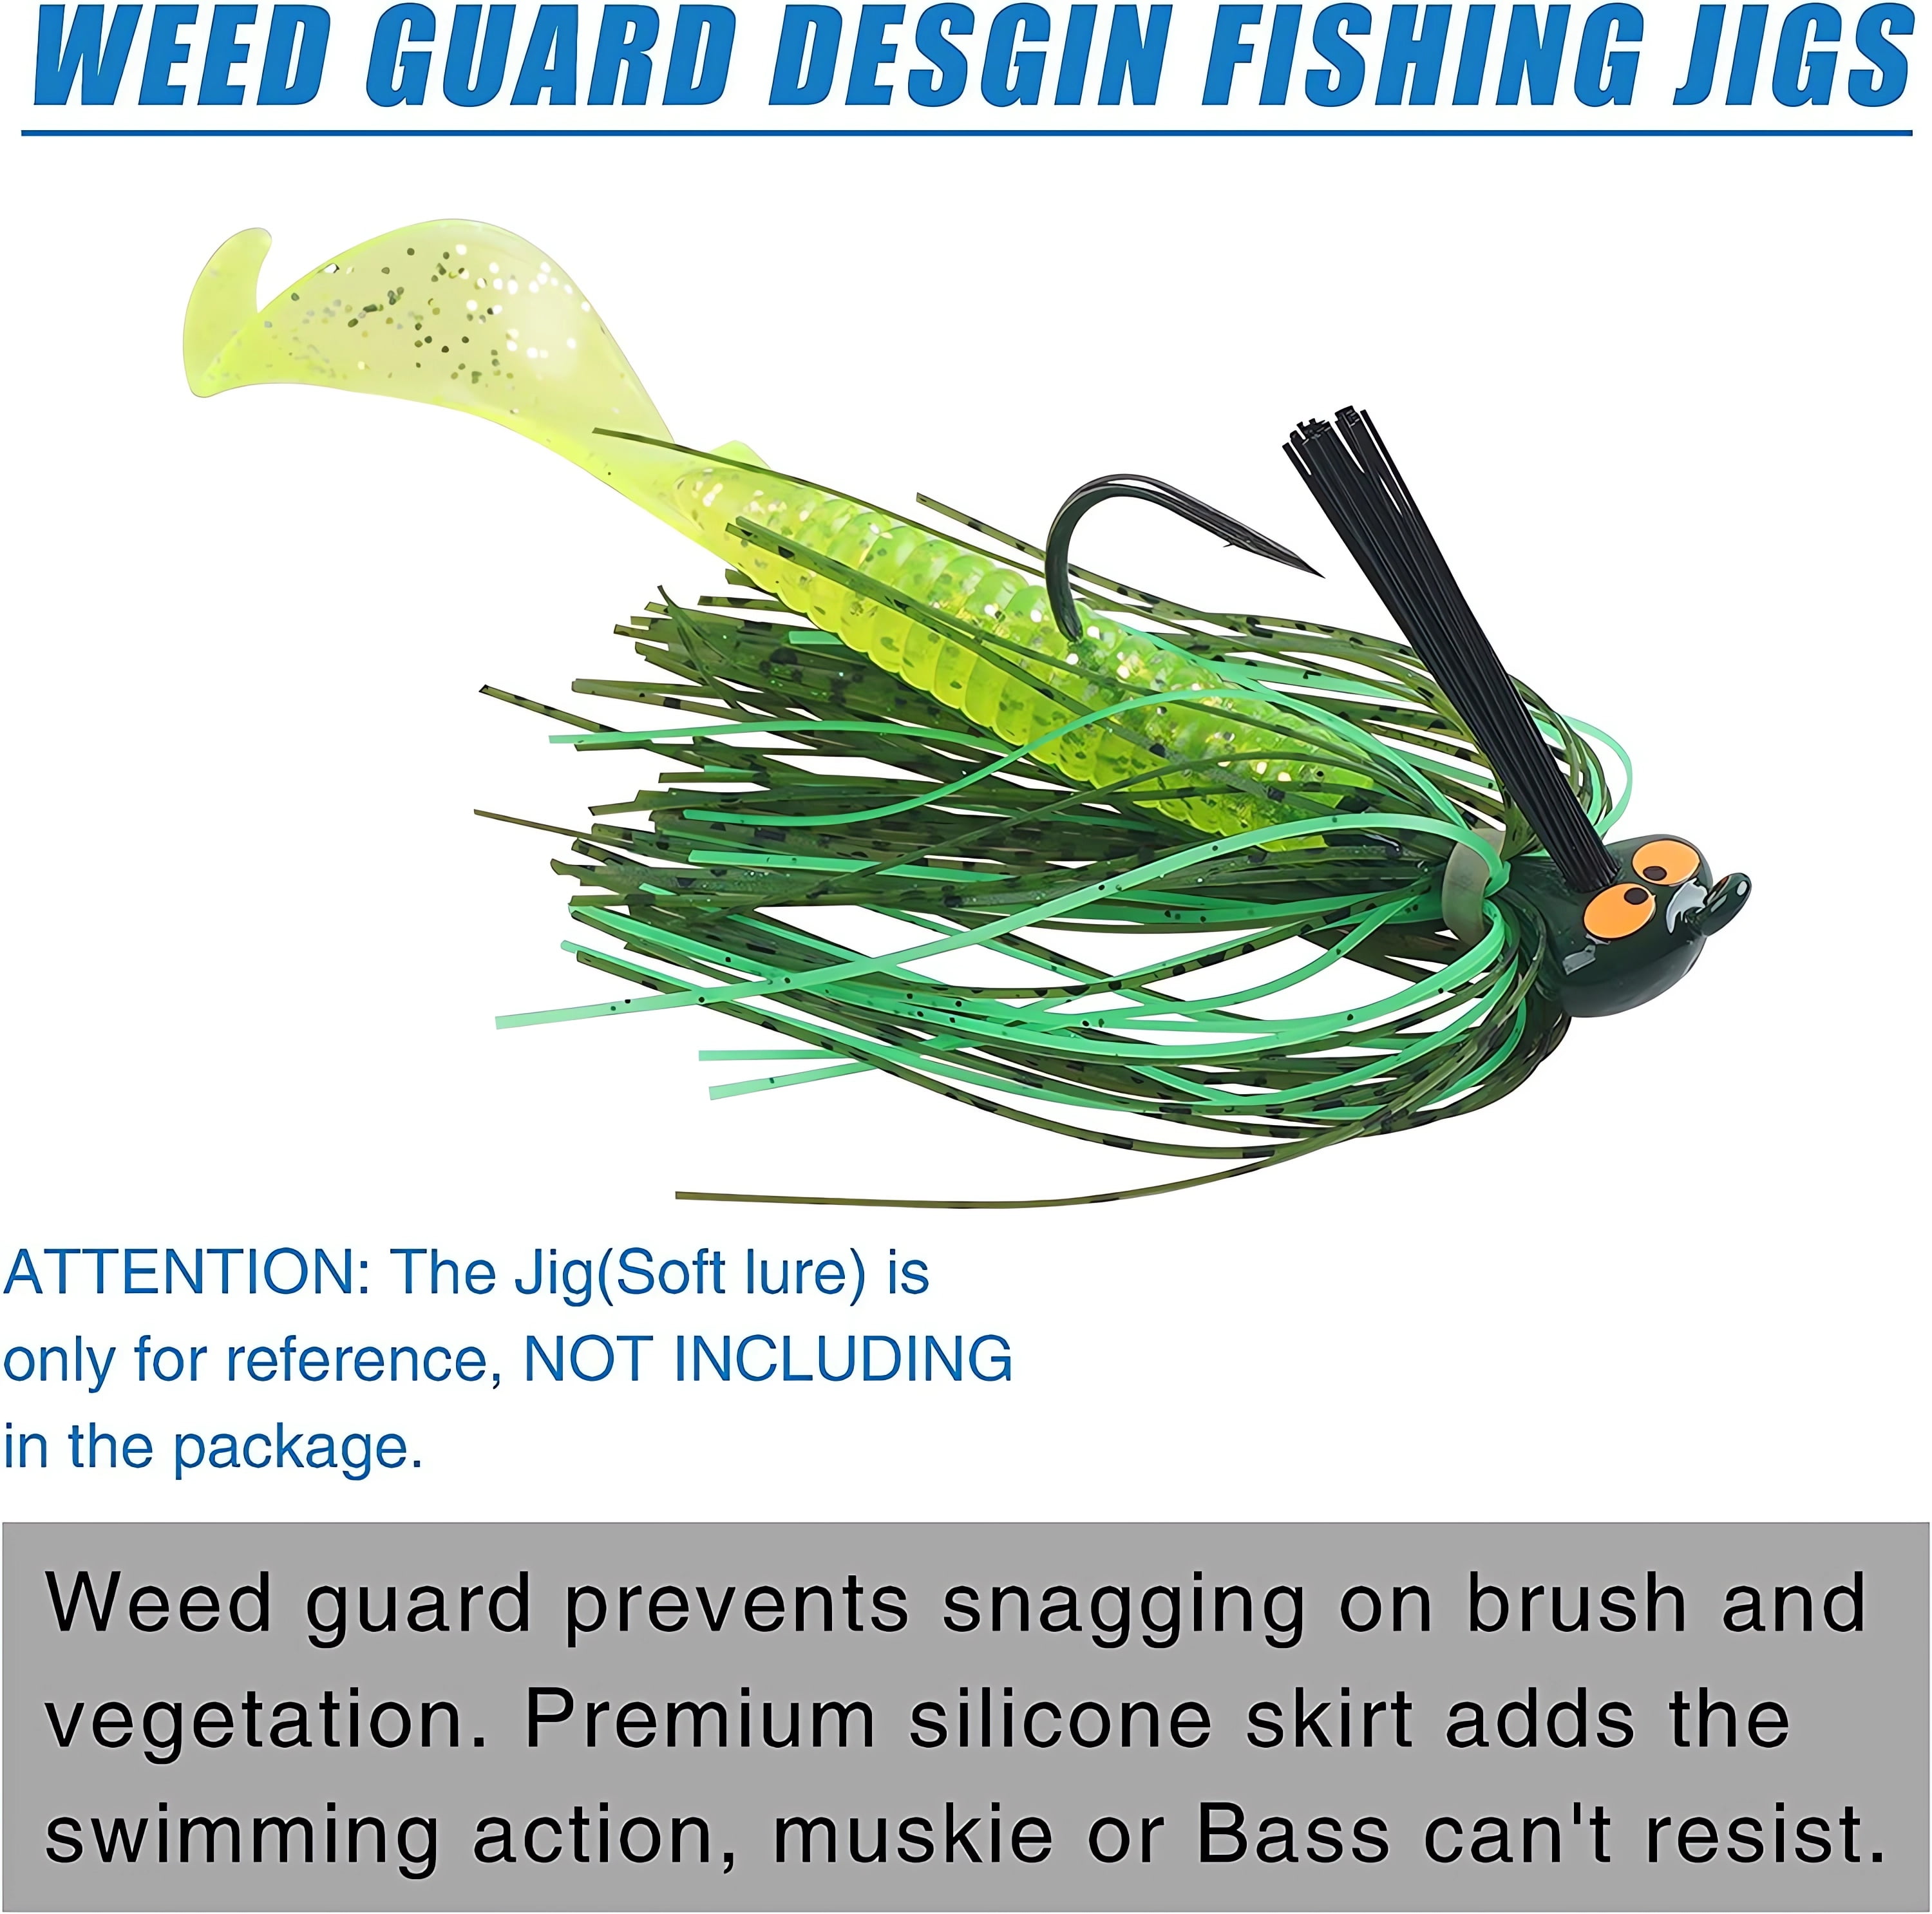 Football Jig for Bass Fishing - 6pcs Football Jig Heads with Weed Guard  Silicon Skirts Weedless Fishing Jig Flipping Jig Swim Jigs for Bass  Artificial Baits Fishing Lure Kit for Pike, Walleye 